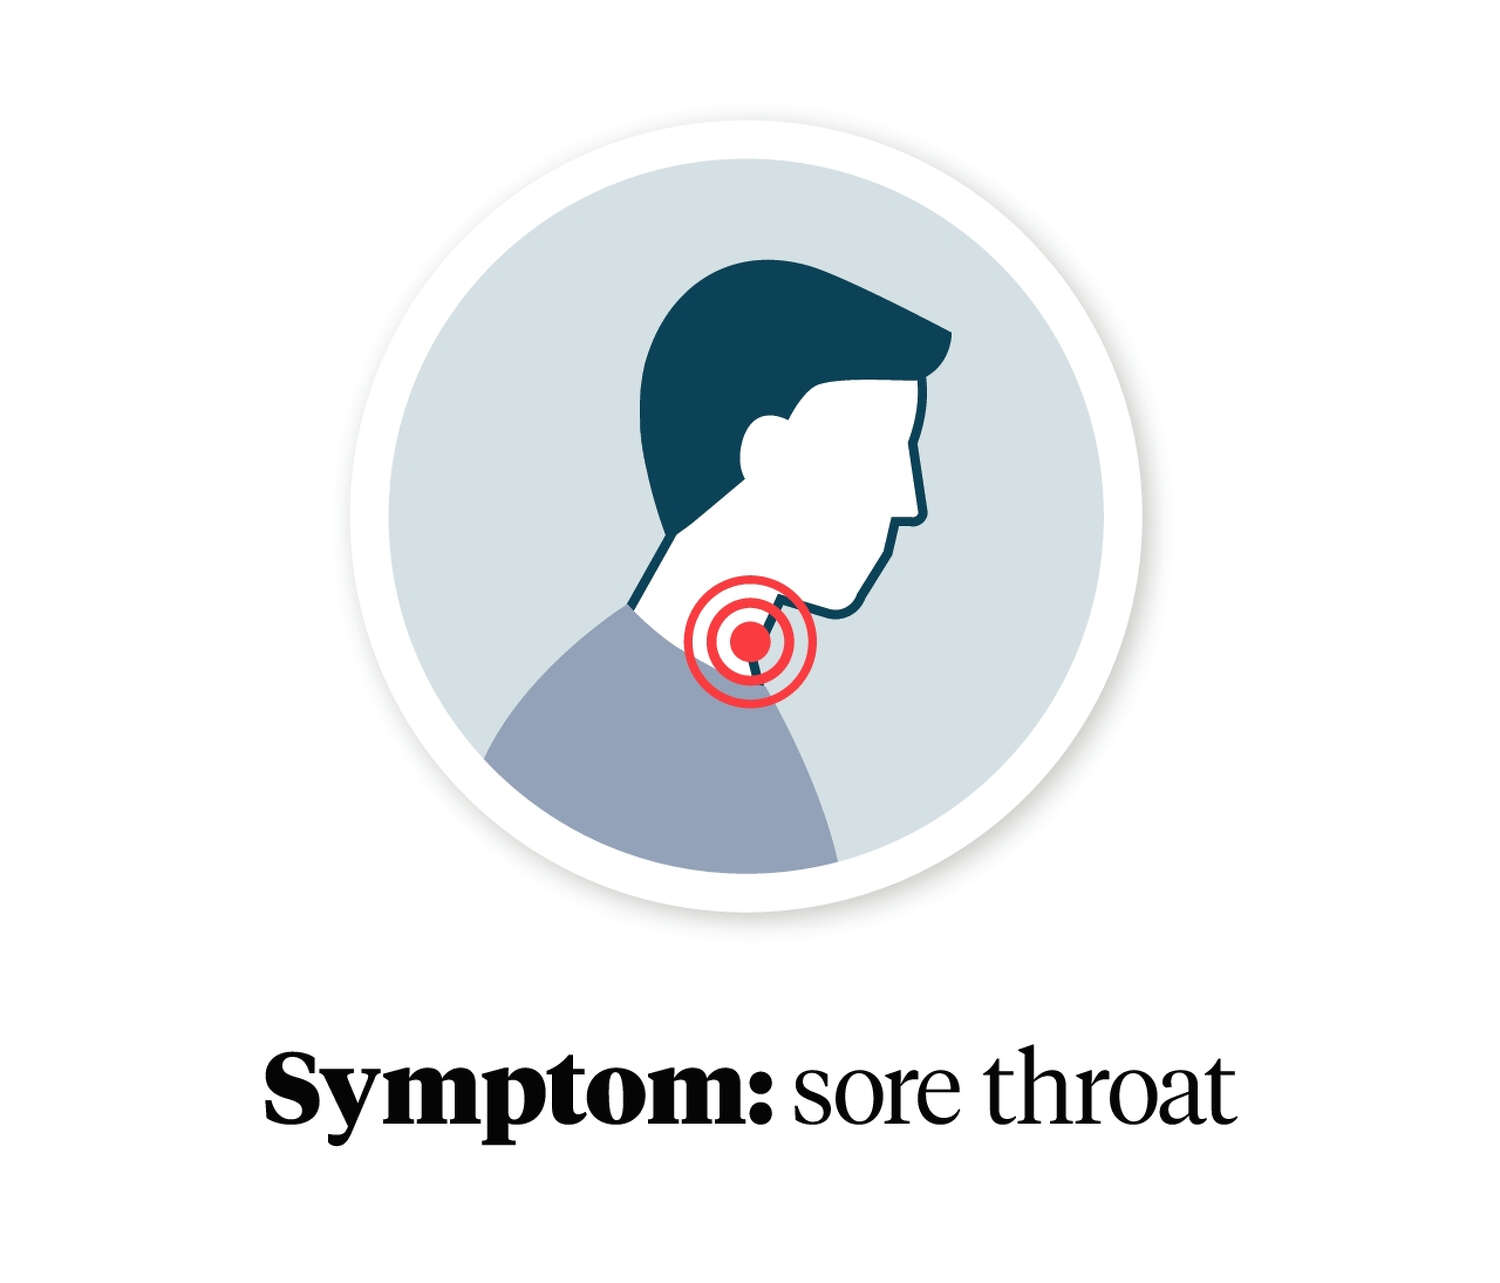 Graphic showing a person with a sore throat